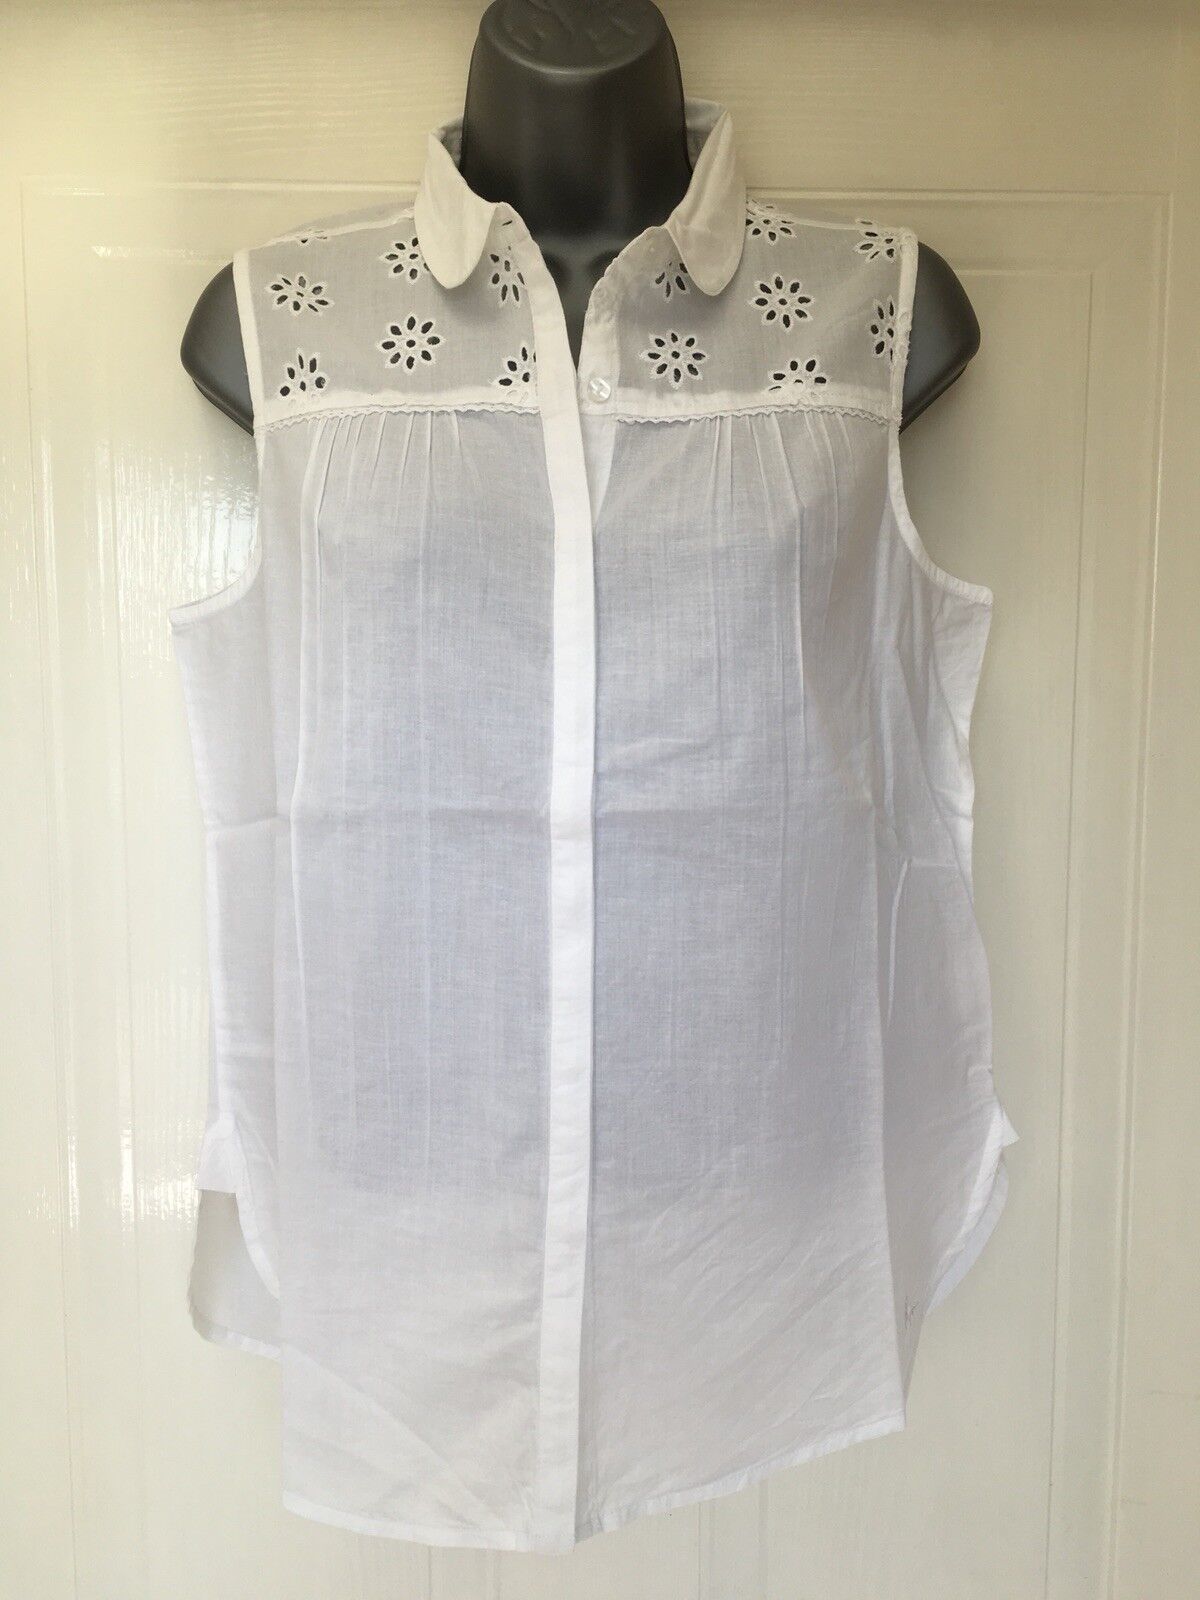 New Jack Wills White Embroidered Cotton Sleeveless Blouse Top Shirt Sizes 6 or 8